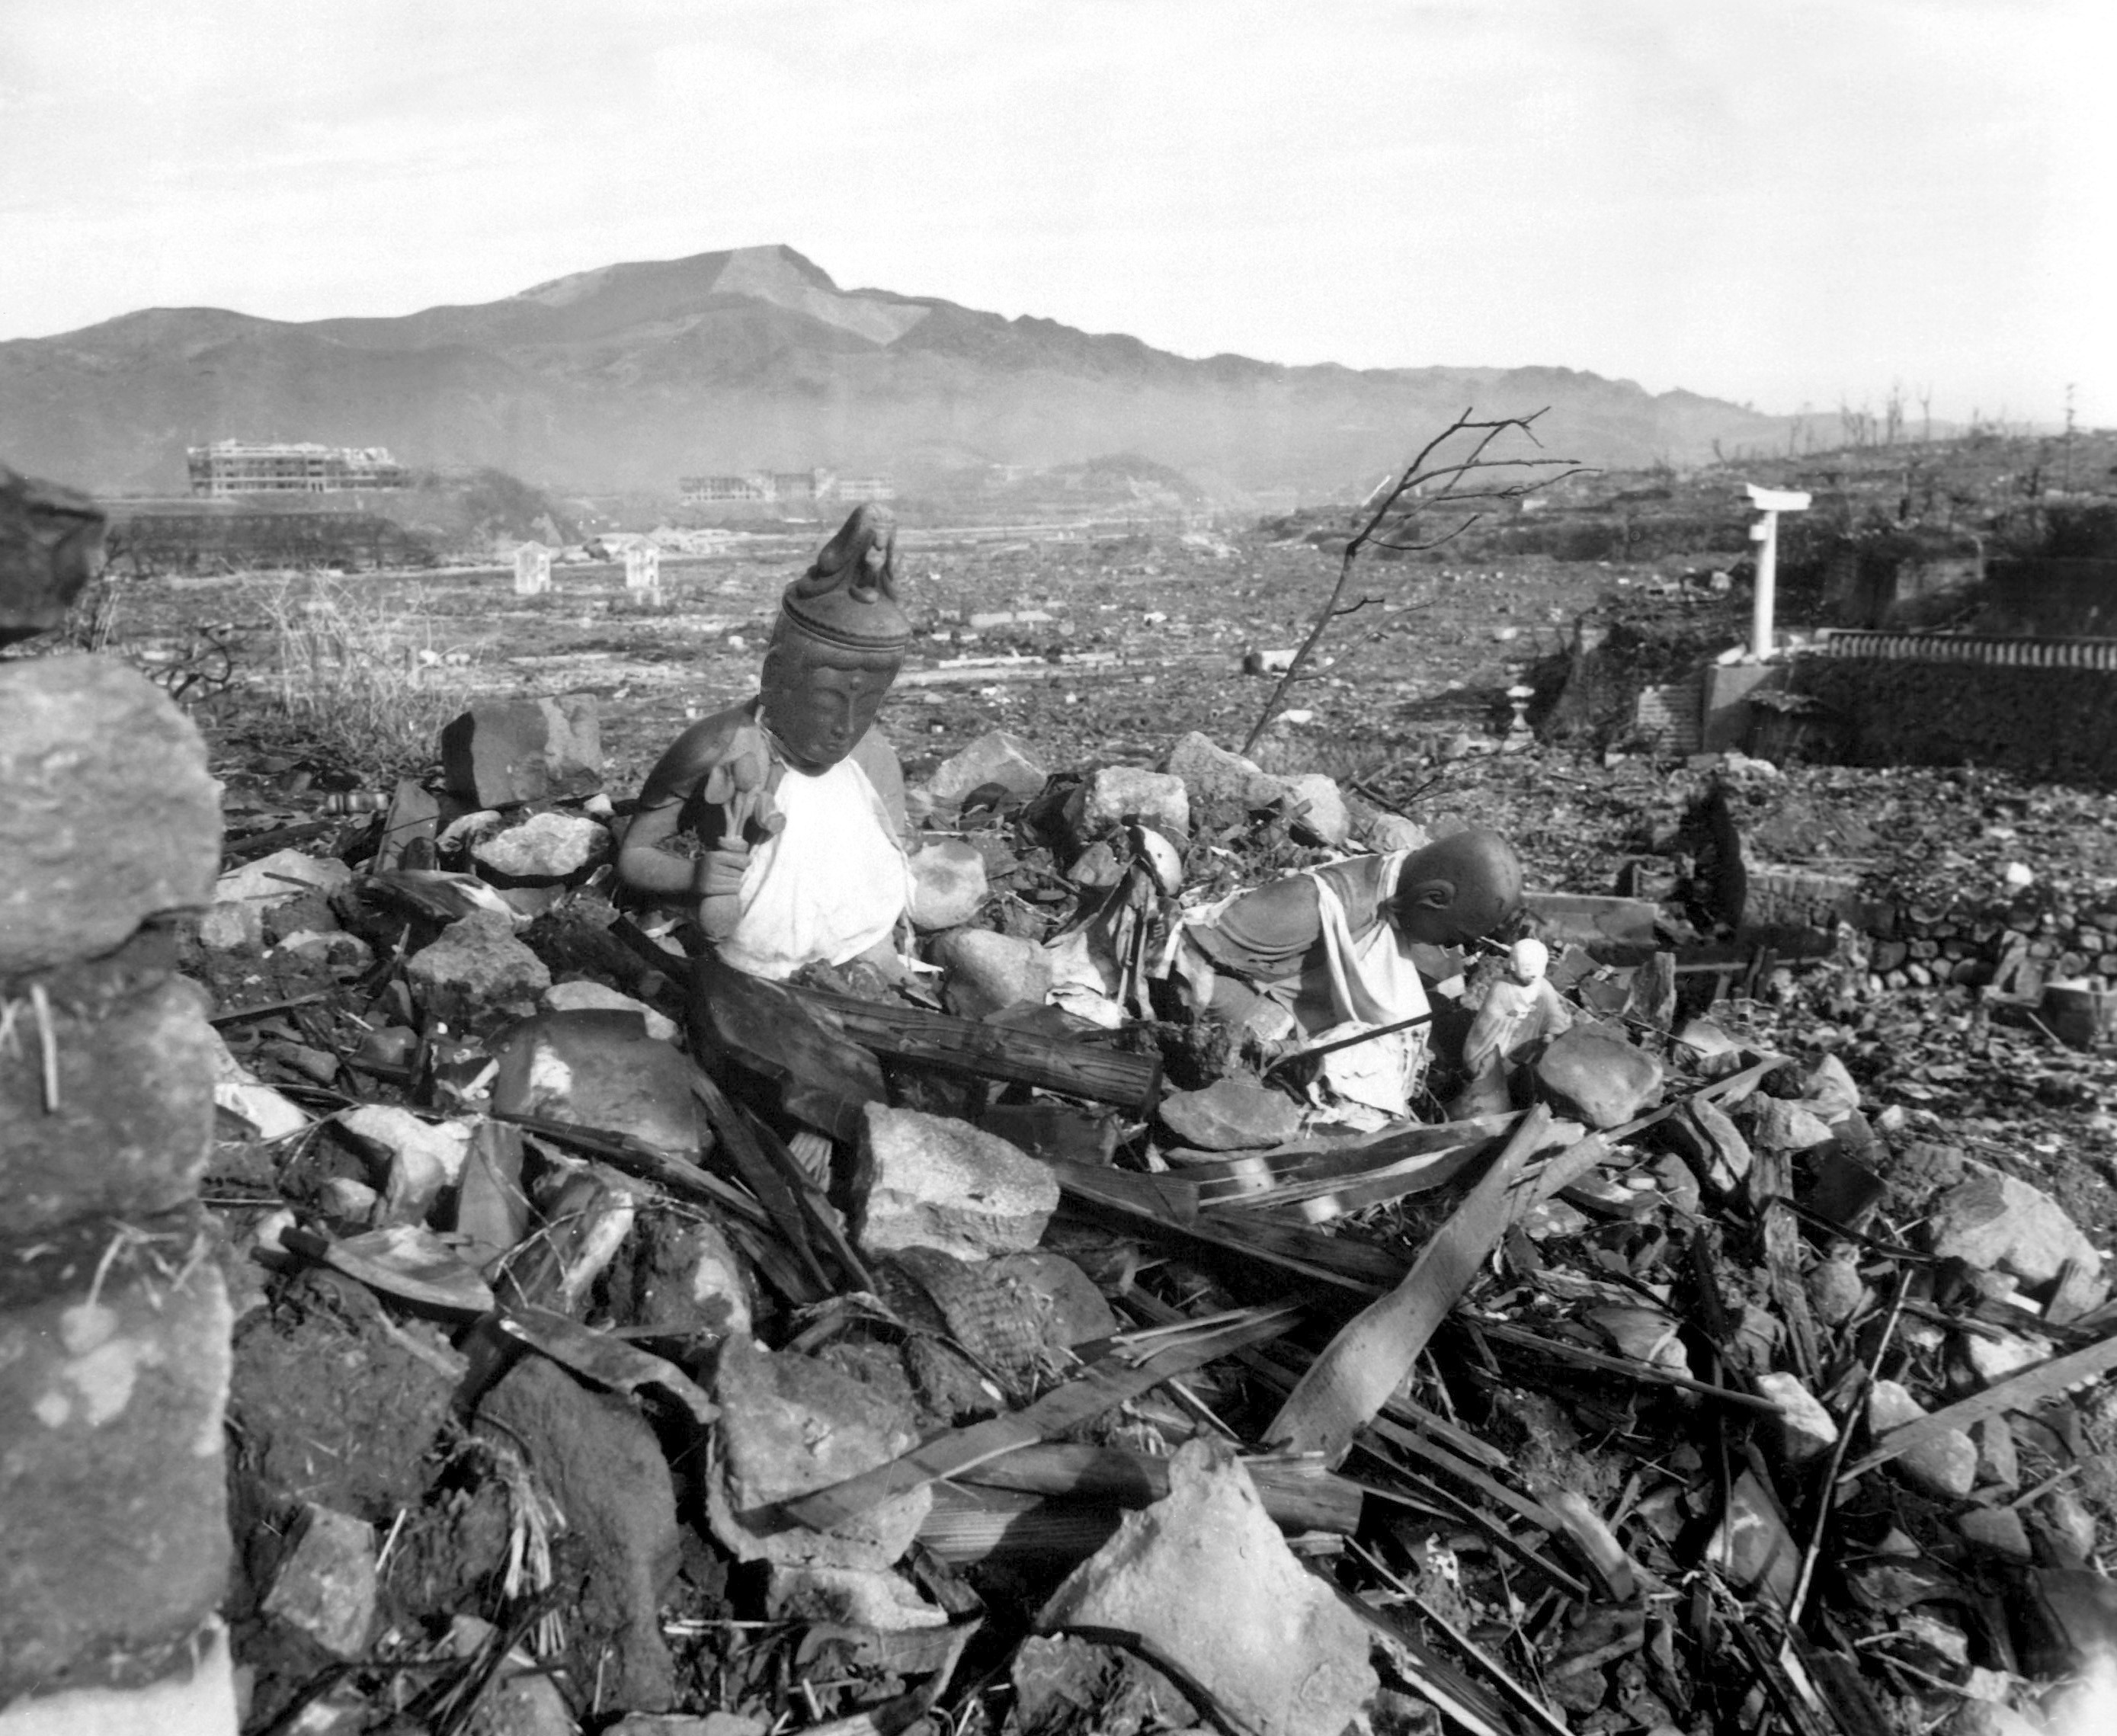 A pile of rubble from a destroyed Buddhist Temple in Nagasaki, Japan, 24 Sep 1945